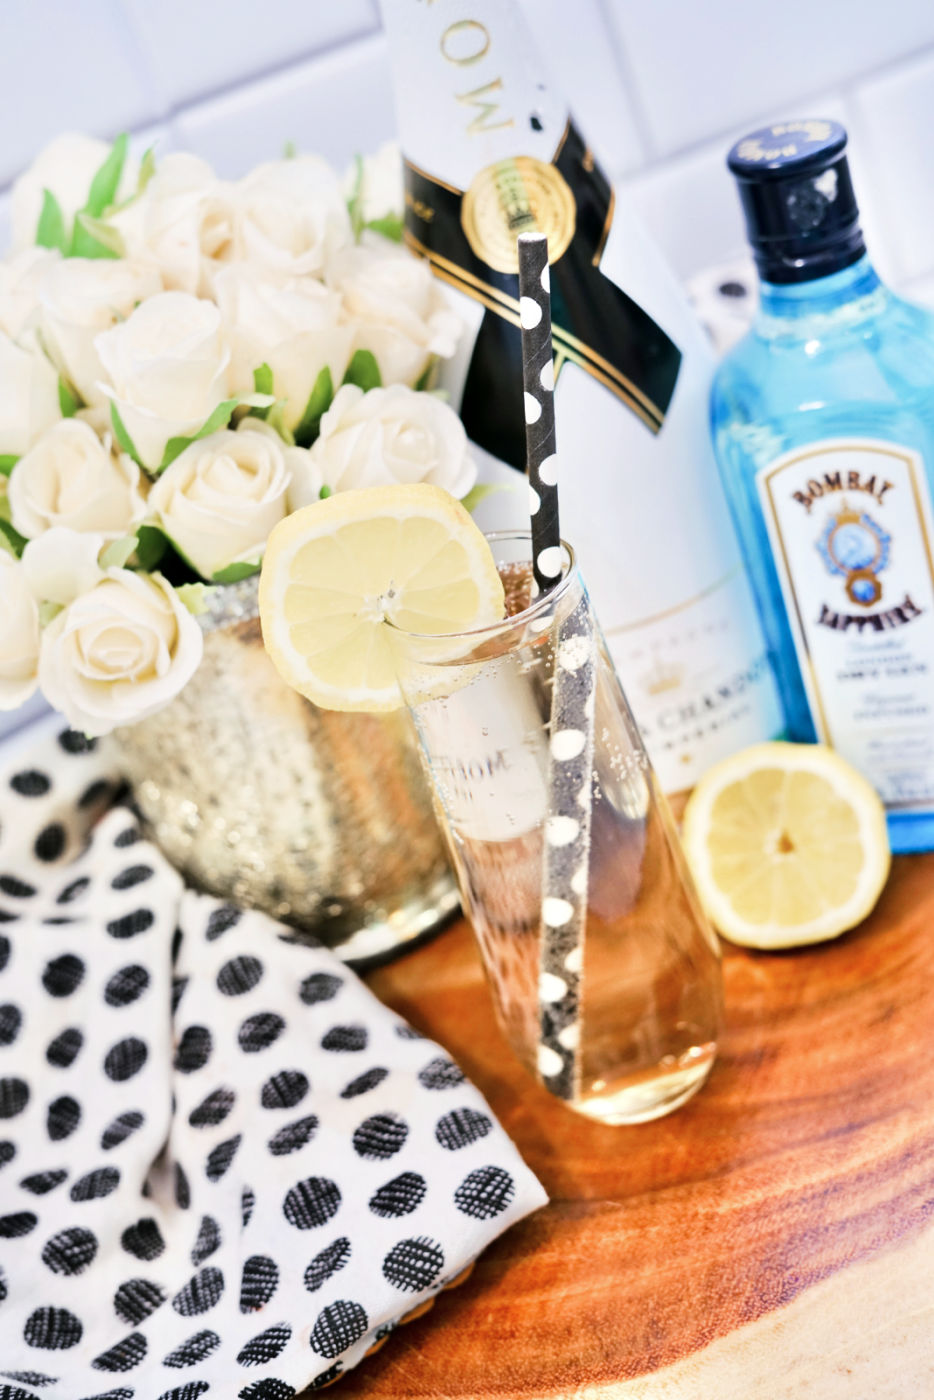 An angled shot of a French 75 cocktail near a vase of white roses and bottles of champagne and gin.